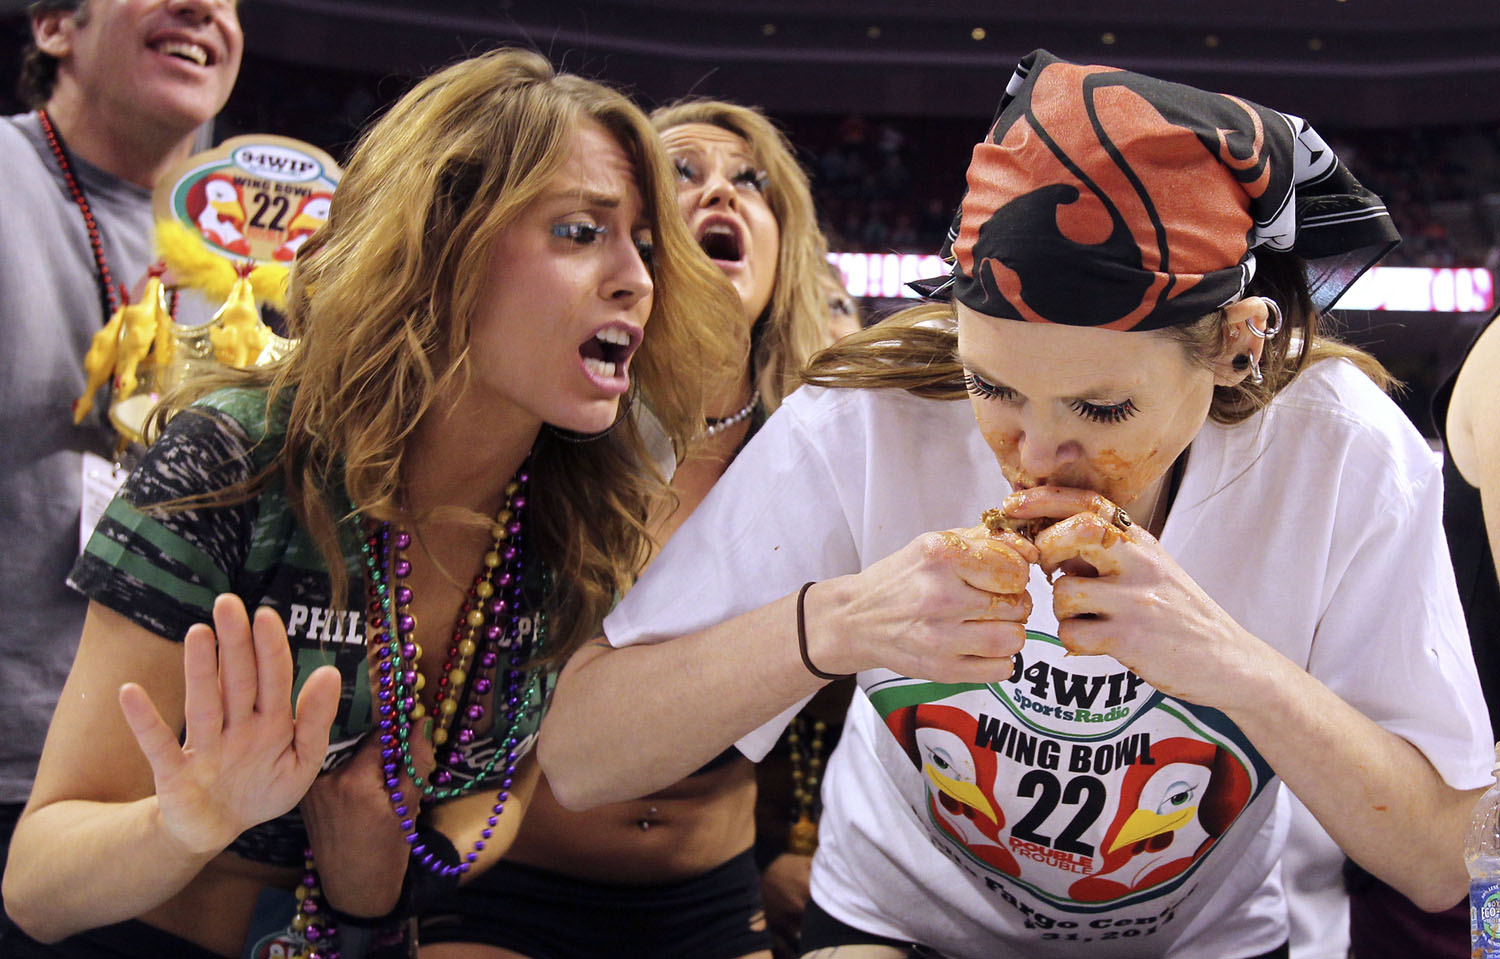 From left: A wingette cheers on contestant Molly Schuyler, of Omaha, Neb., during the Sportsradio 94 WIP's Wing Bowl 22 held at the Wells Fargo Center in Philadelphia, on Jan. 31, 2014. (Alejandro A. Alvarez&mdash;Philadelphia Daily News/AP)